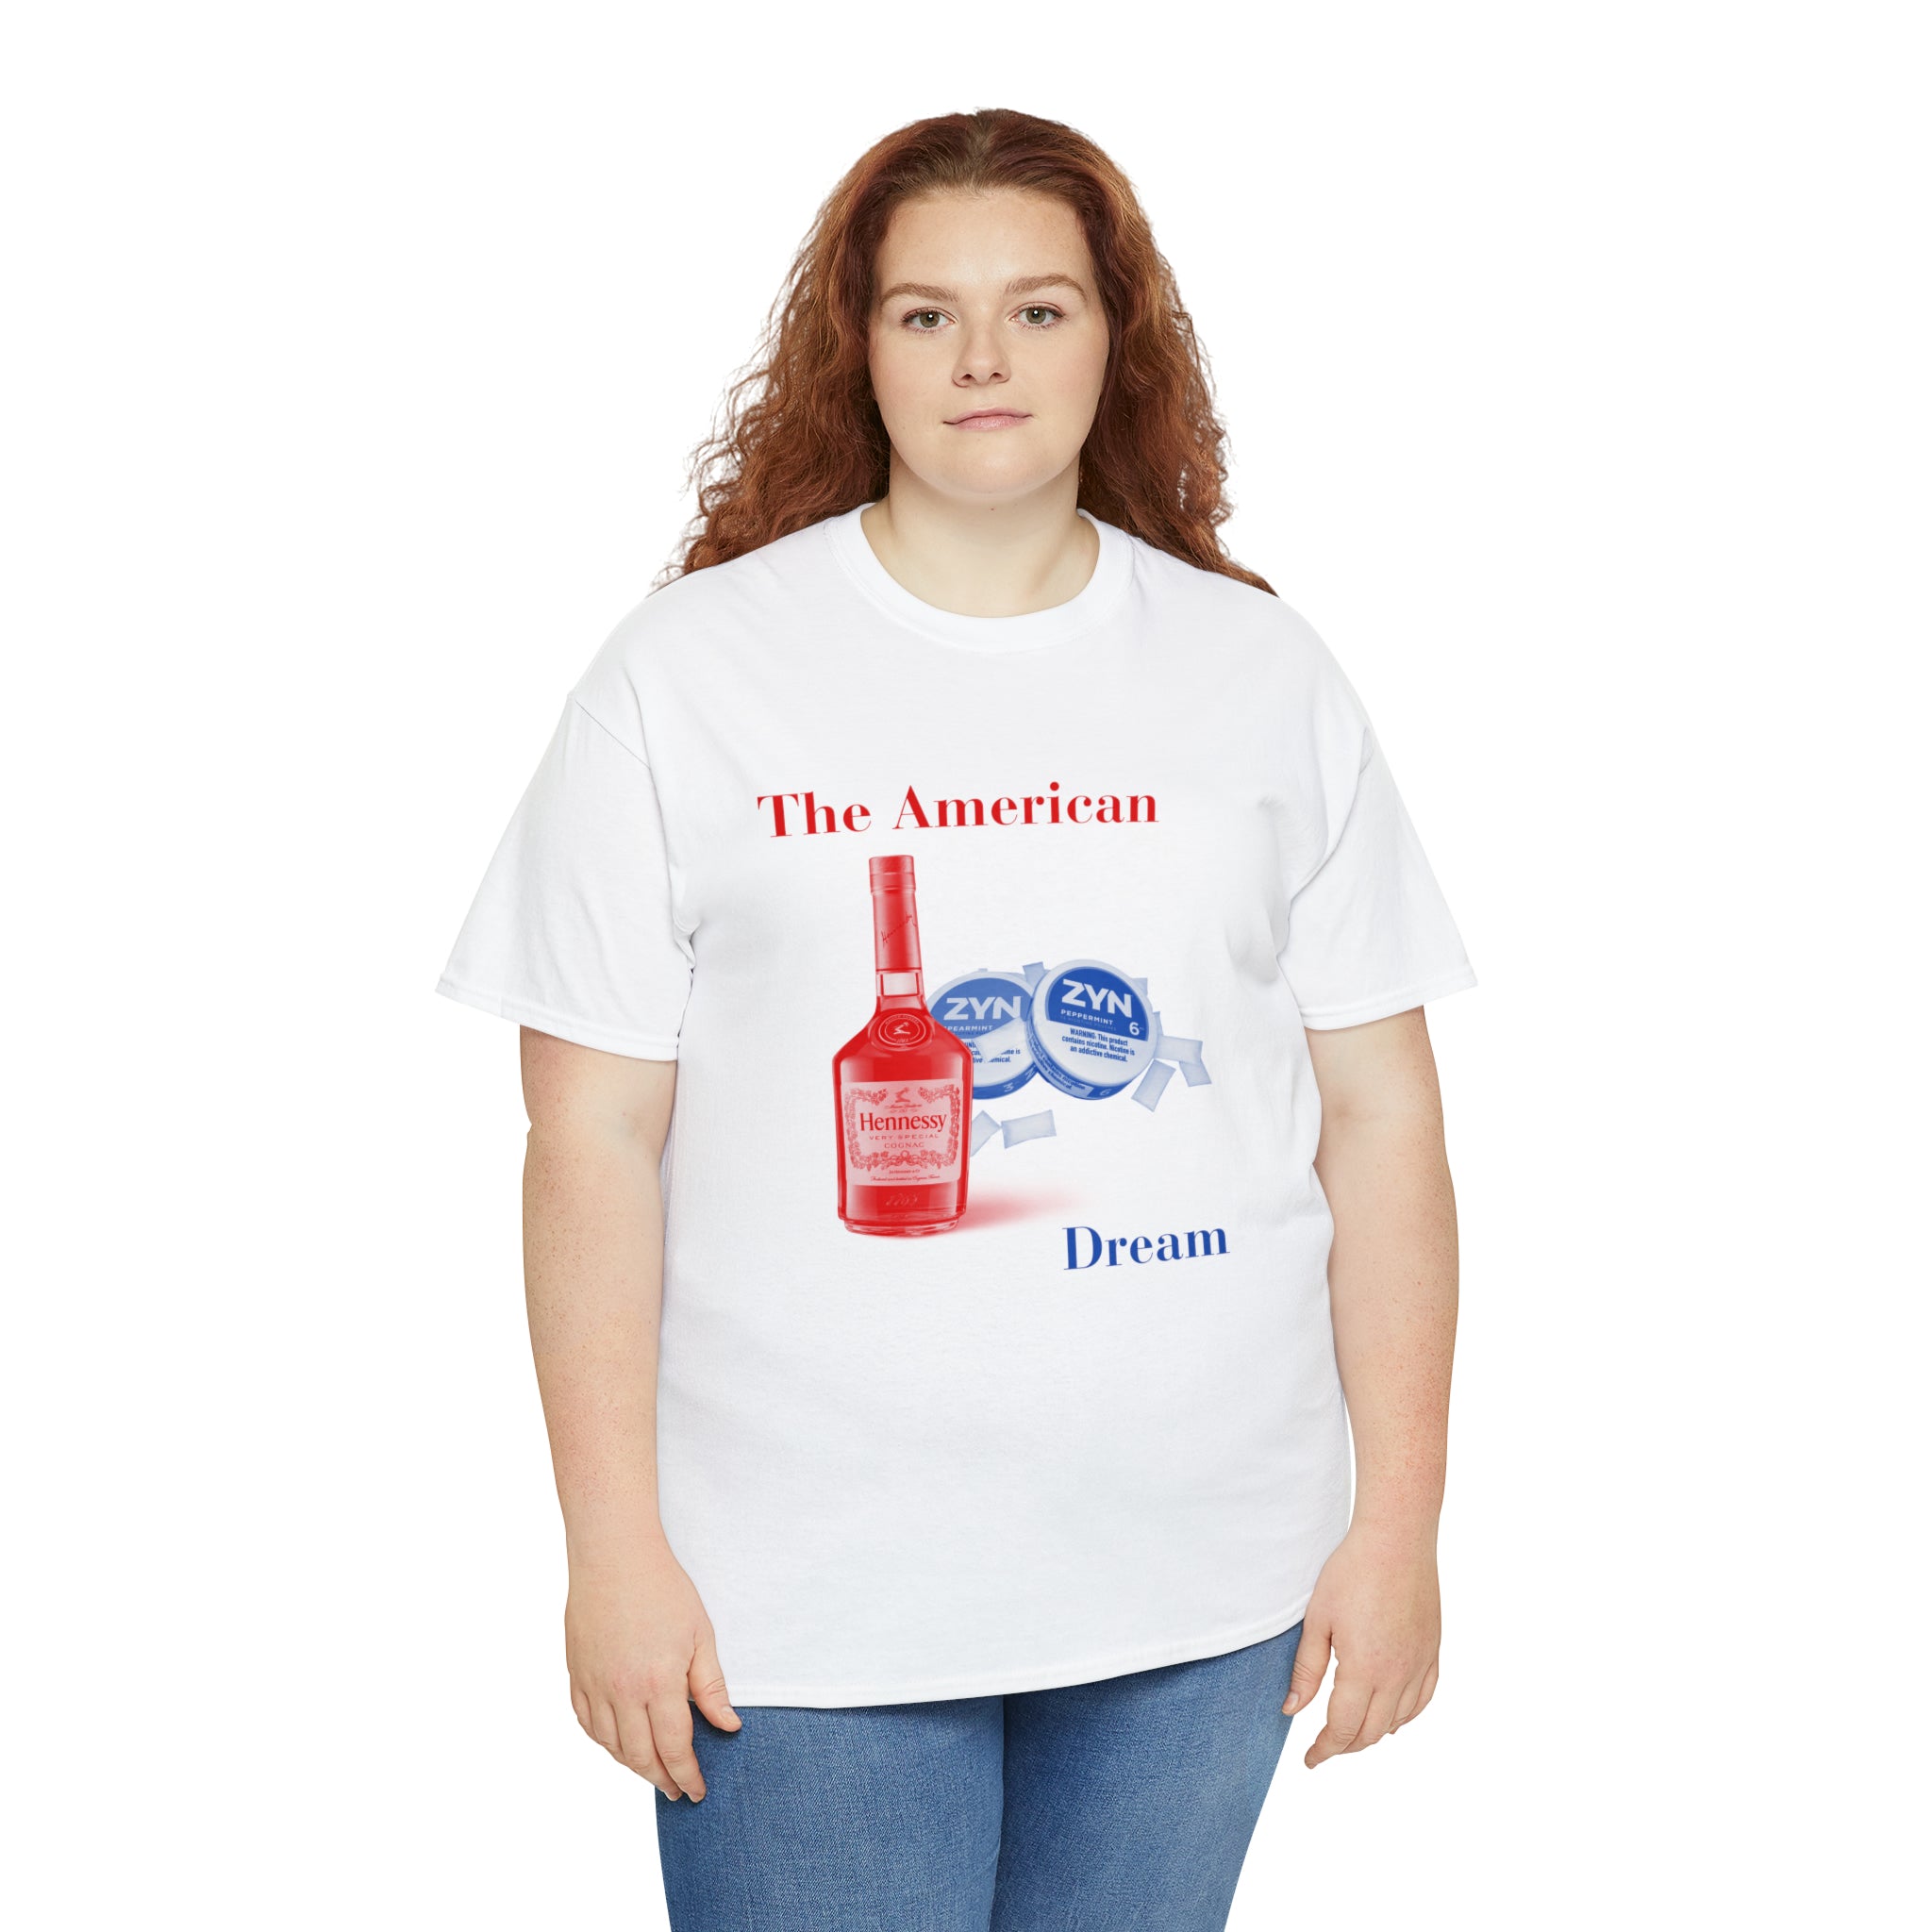 The American Dream Hennessy and Zyns 6mg - Unisex Heavy Cotton Tee